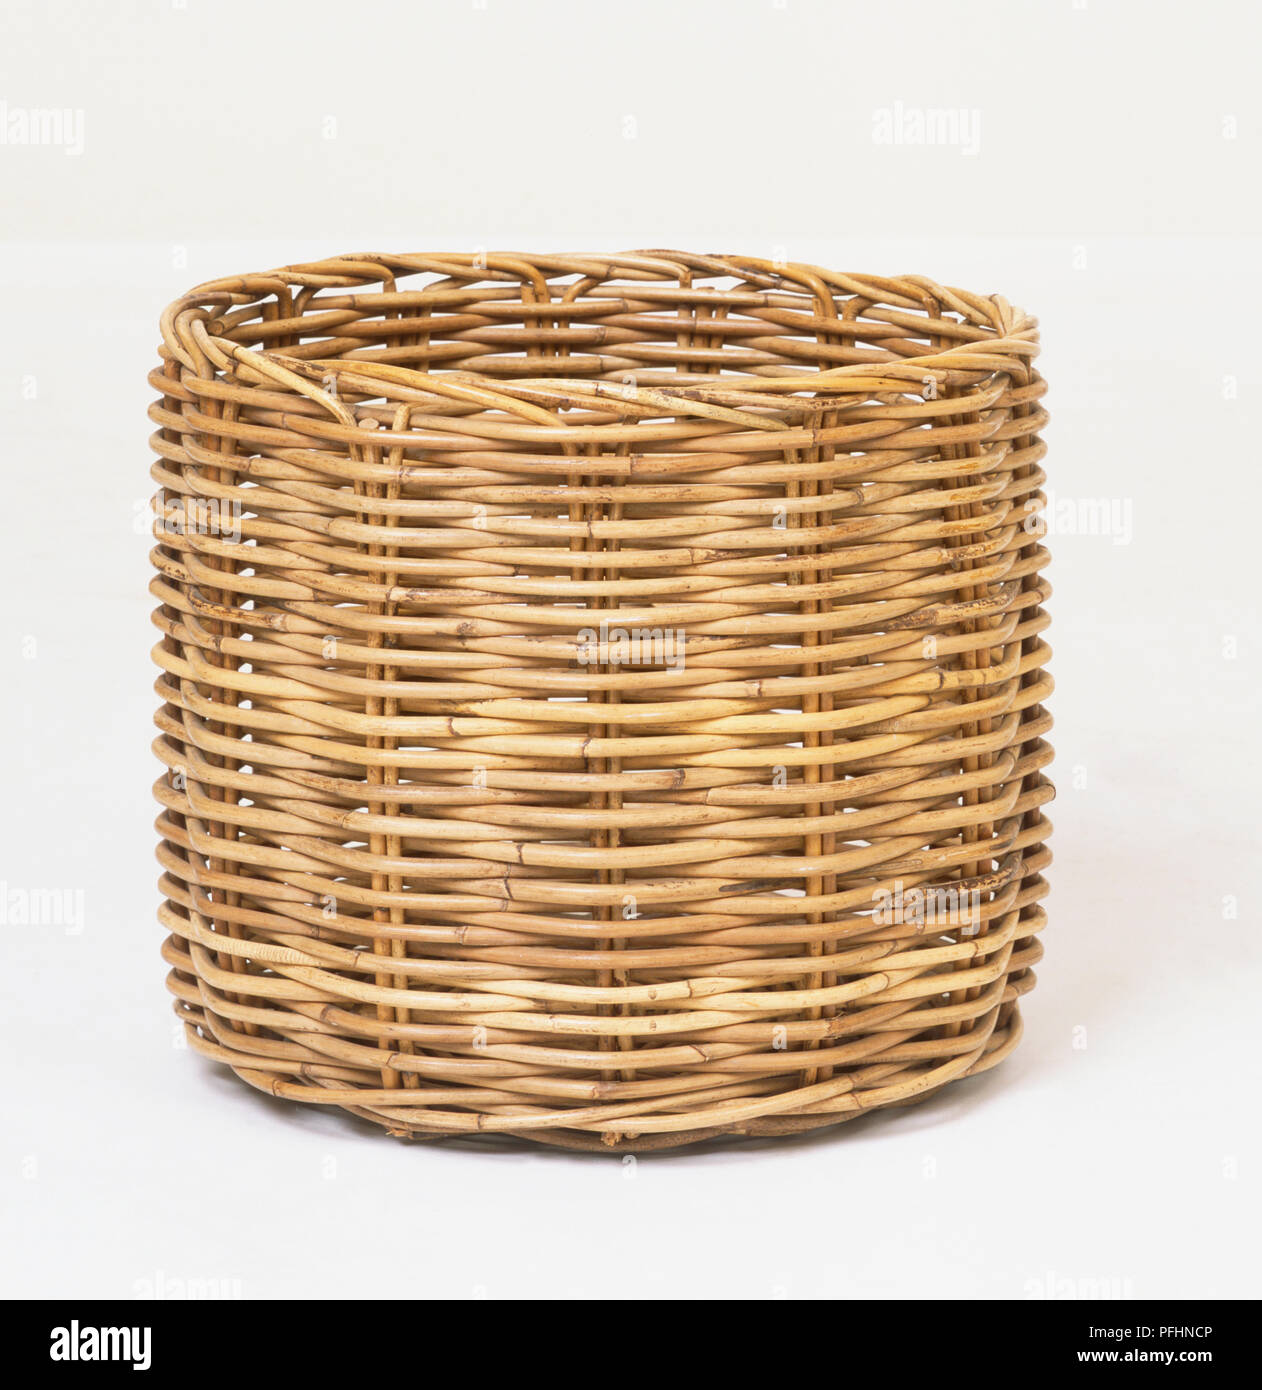 Cylindrical wicker basket, close up. Stock Photo